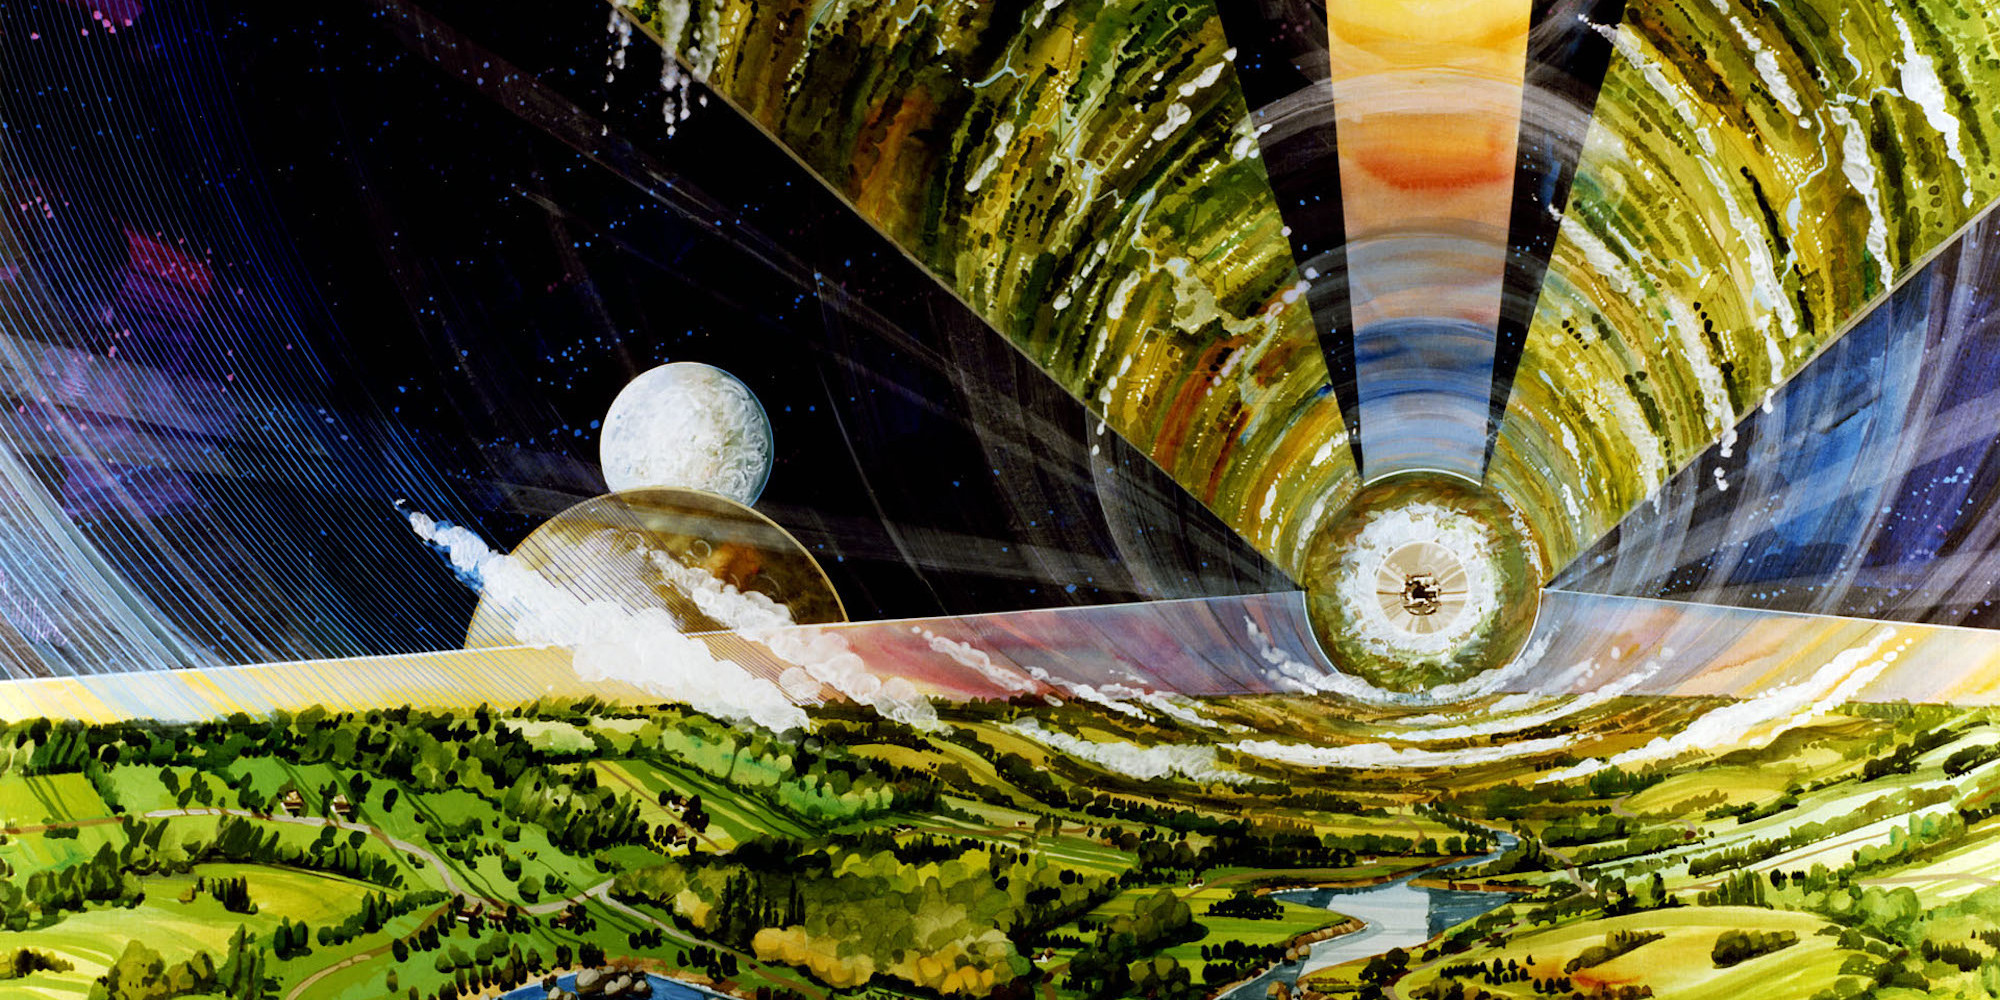 O’Neill Cylinder. 1974. Painting by Rick Guidice, NASA Ames Research Center. Courtesy NASA